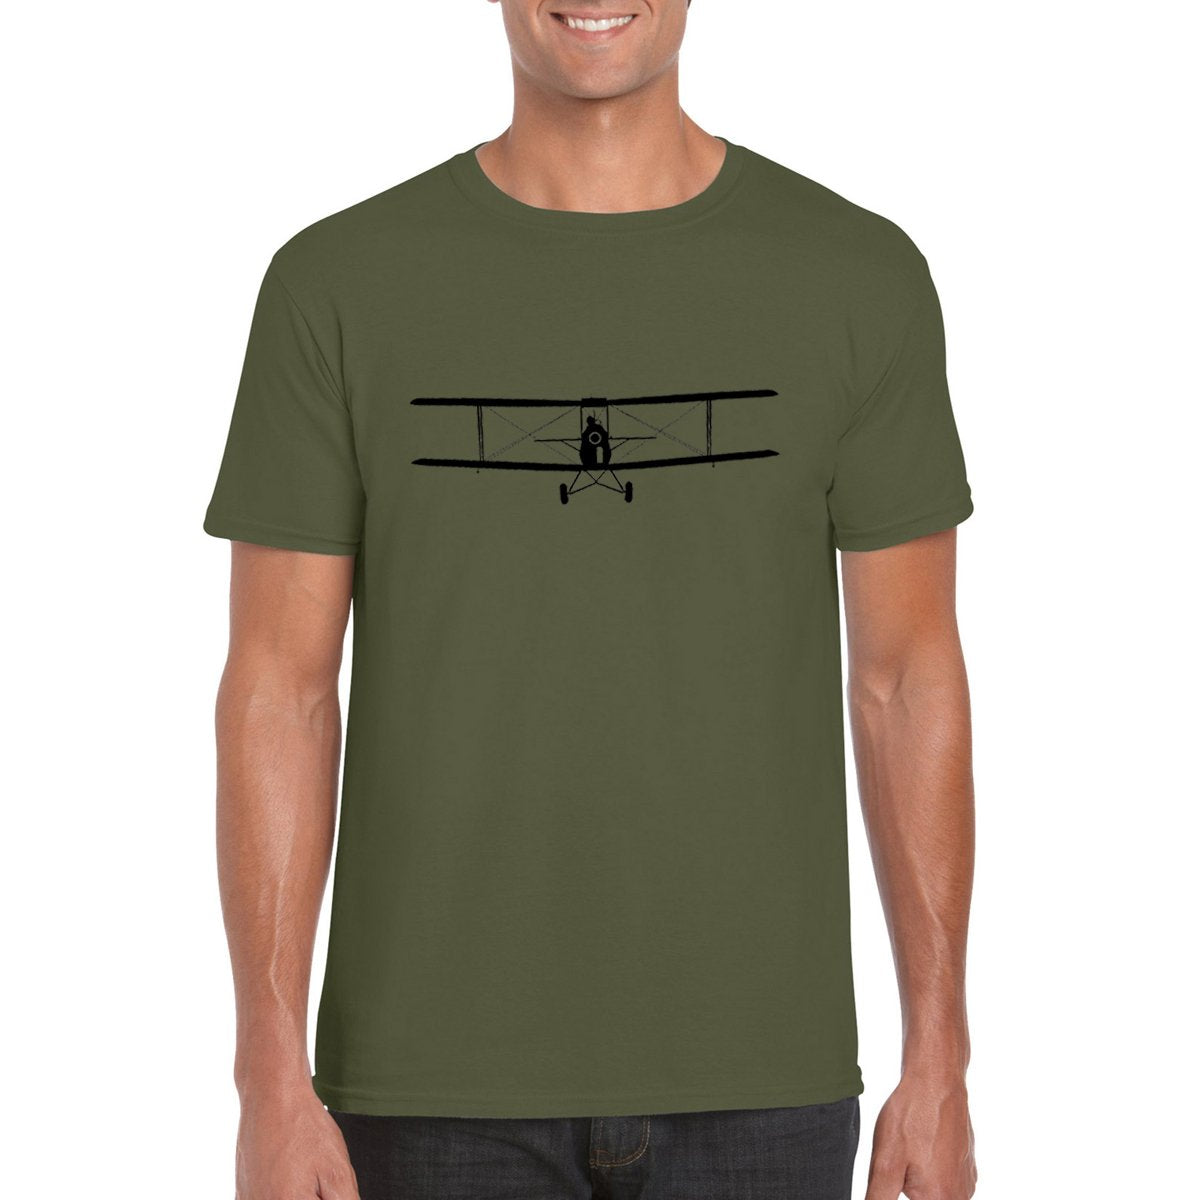 TIGERMOTH Unisex Semi-Fitted T-Shirt